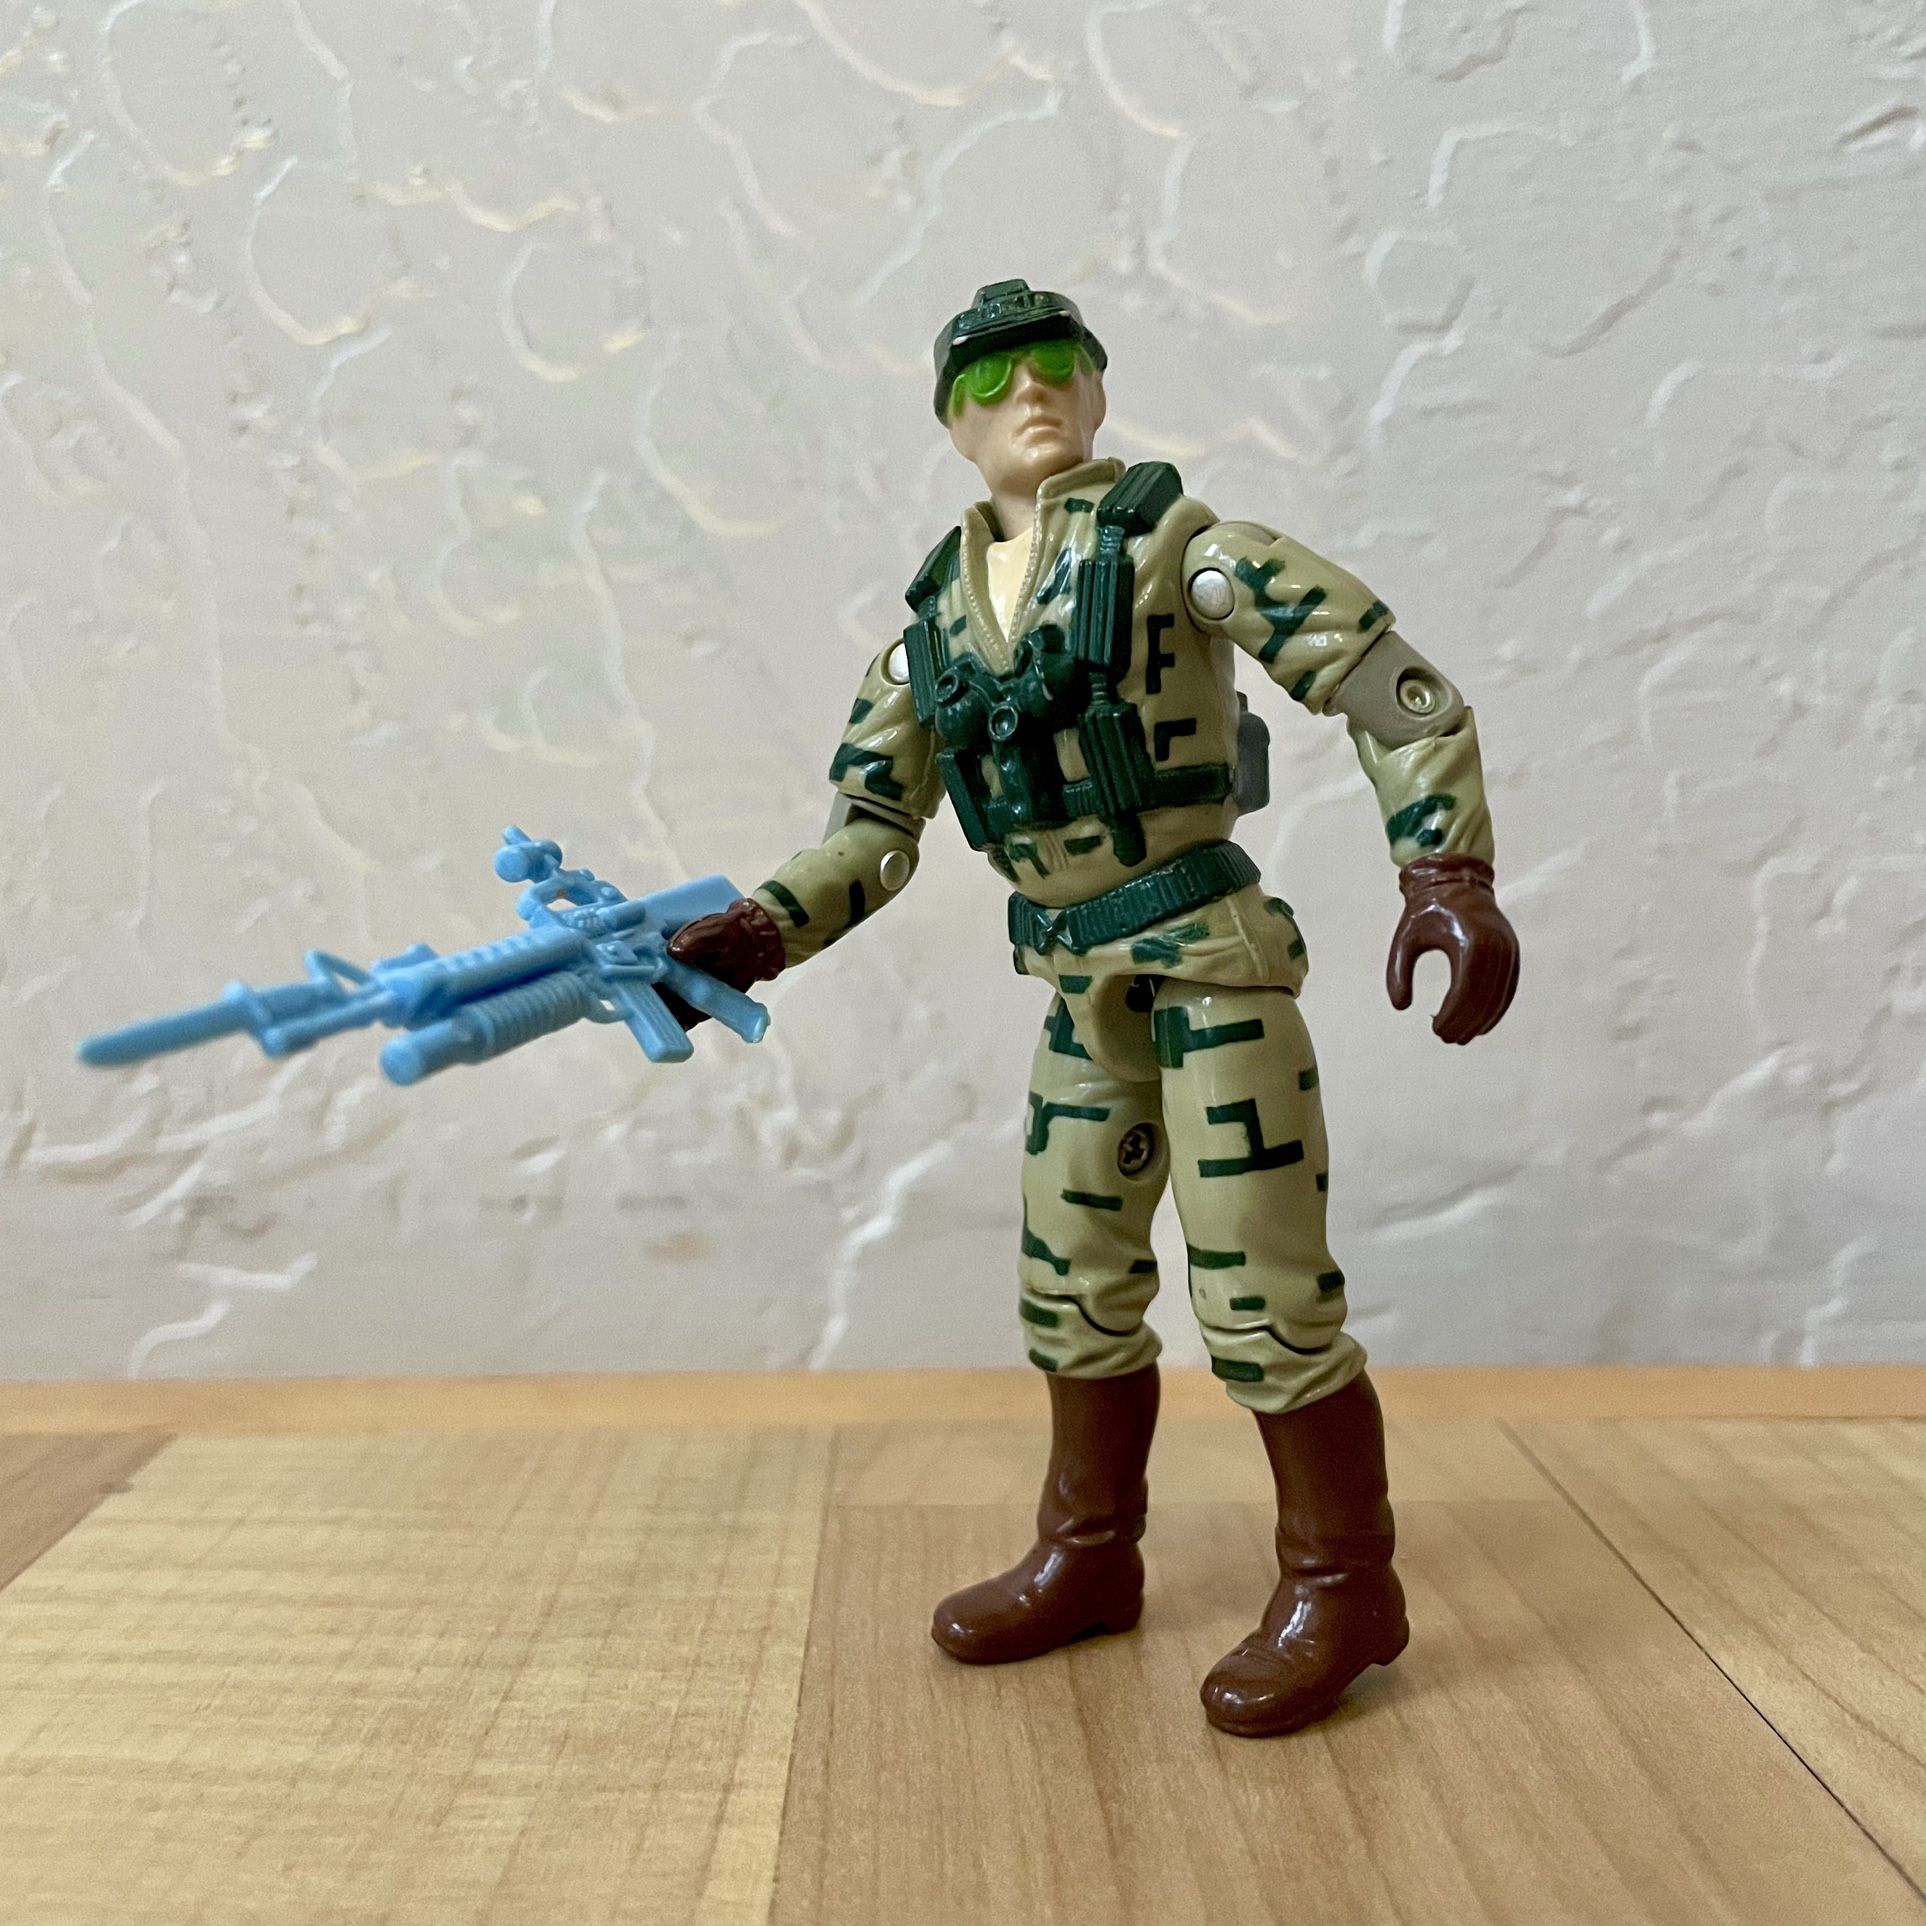 Vintage 1989 G.I. Joe Recoil Action Figure With One Accessory Weapon Collectible Toy